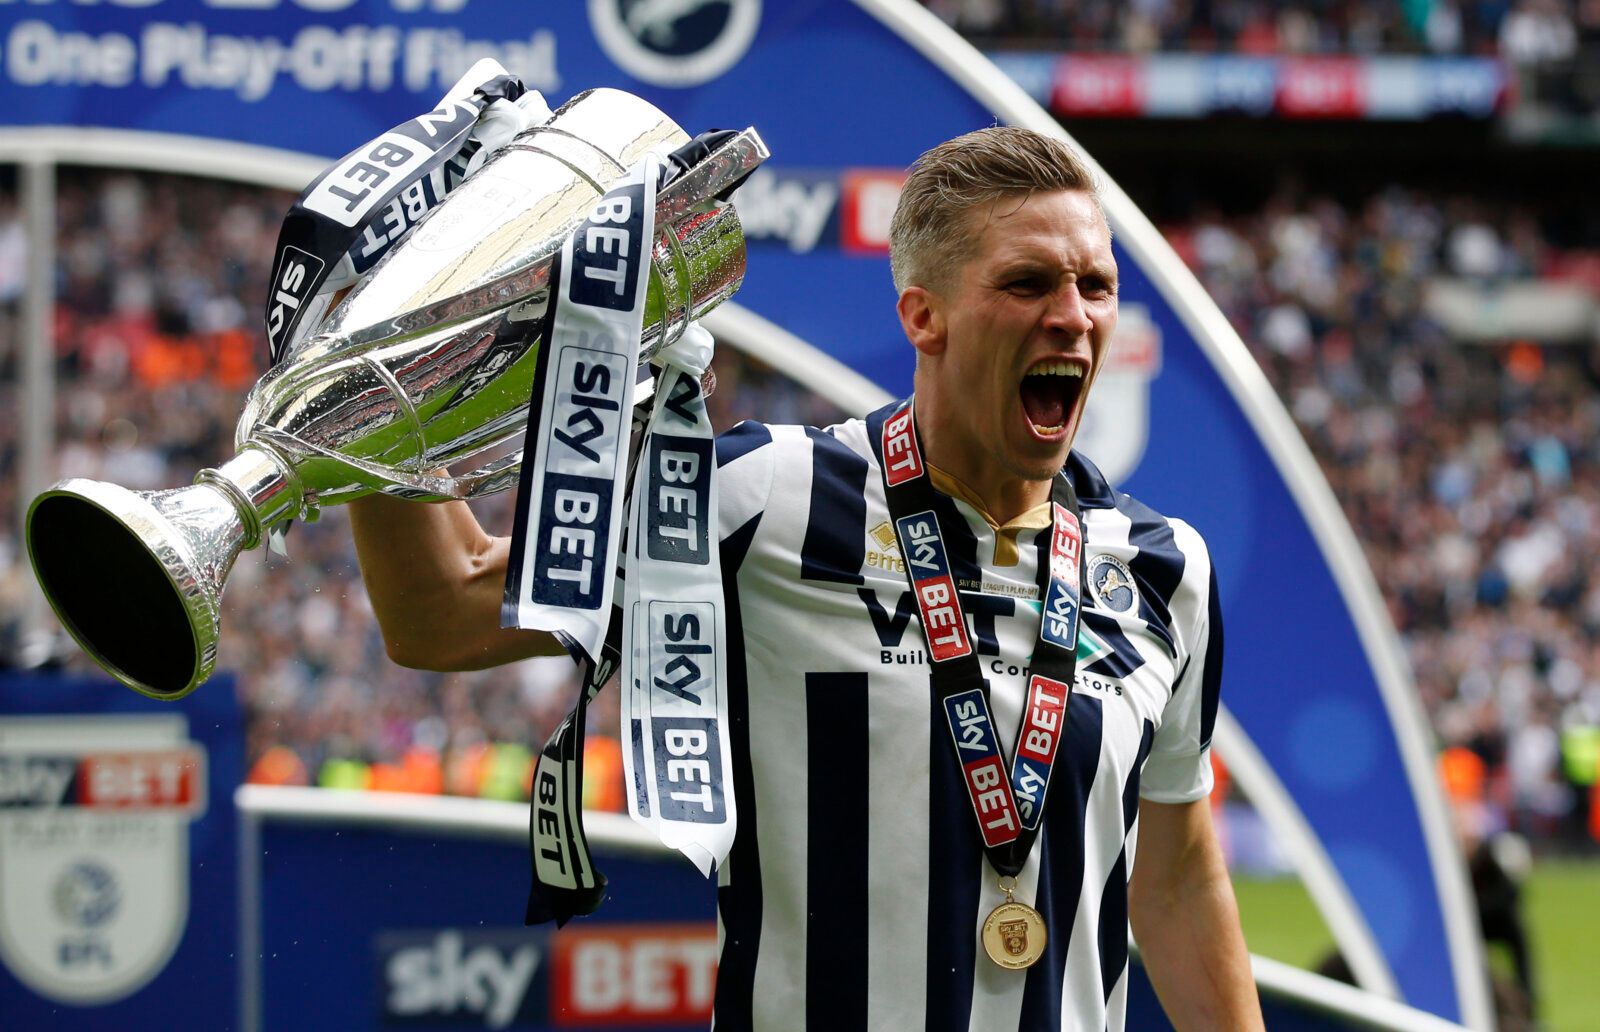 Britain Football Soccer - Bradford City v Millwall - Sky Bet League One Play-Off Final - Wembley Stadium, London, England - 20/5/17 Millwall's Steve Morison celebrates with the trophy after getting promoted to the Sky Bet Championship  Mandatory Credit: Action Images / Peter Cziborra Livepic EDITORIAL USE ONLY. No use with unauthorized audio, video, data, fixture lists, club/league logos or 